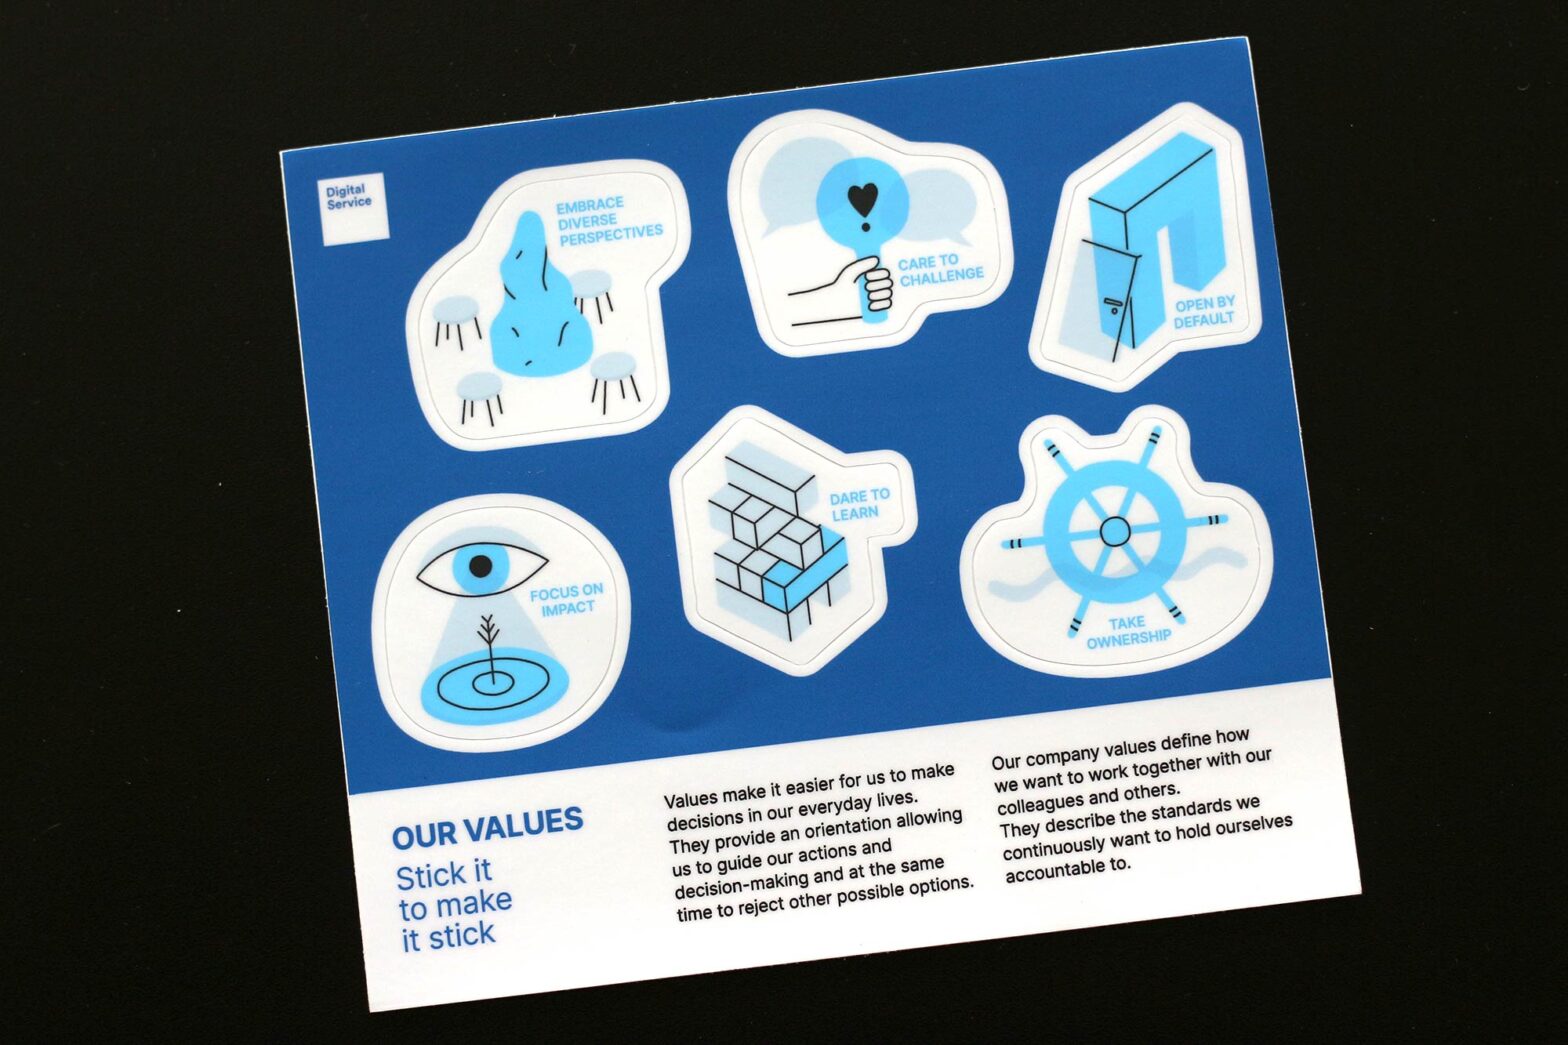 A sticker sheet labelled ‘Our values – stick it to make it stick’ with 6 stickers with illustrations; they say: 1. Embrace diverse perspectives – with 4 stools around an amorphous shape 2. Care to challenge – a hand raising a sign with a heart-shaped exclamation mark on it 3. Open by default – a gate with an unhinged door leaned against it 4. Focus on impact – an eye looking at an arrow sticking in a bullseye target 5. Date to learn – a stack of wooden Jenga blocks with one middle block in a different colour 6. Take ownership – a ship’s helm with some waves behind it